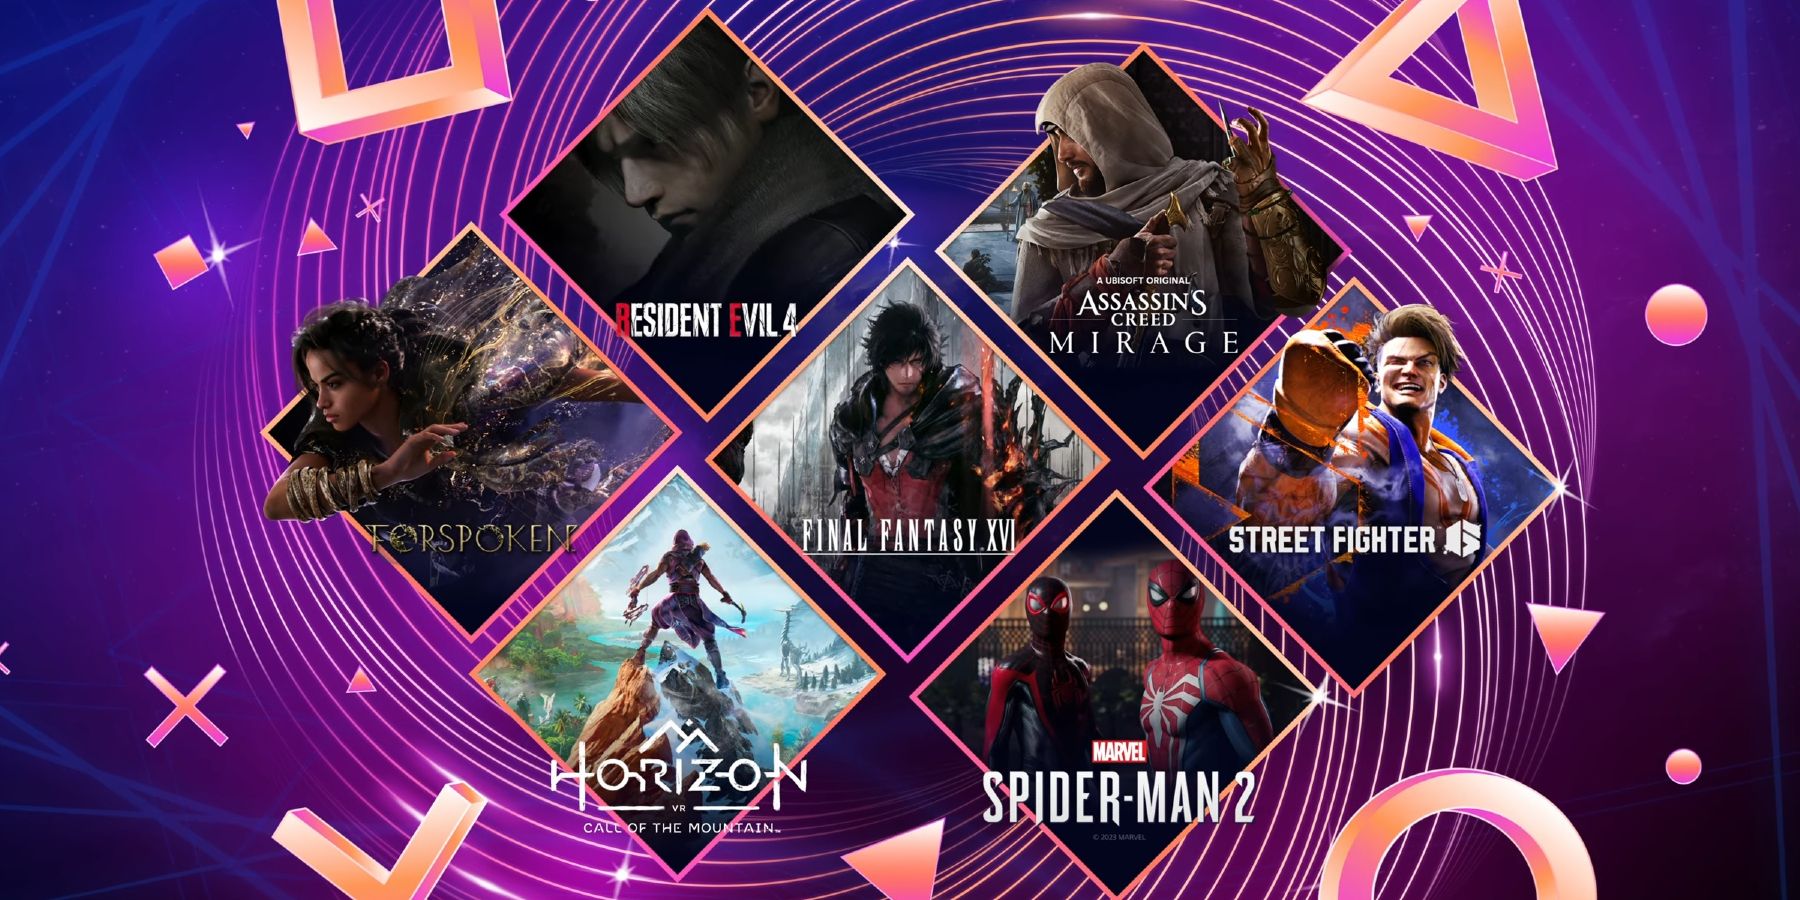 Upcoming PS5 games: New PS5 games for 2023 and beyond